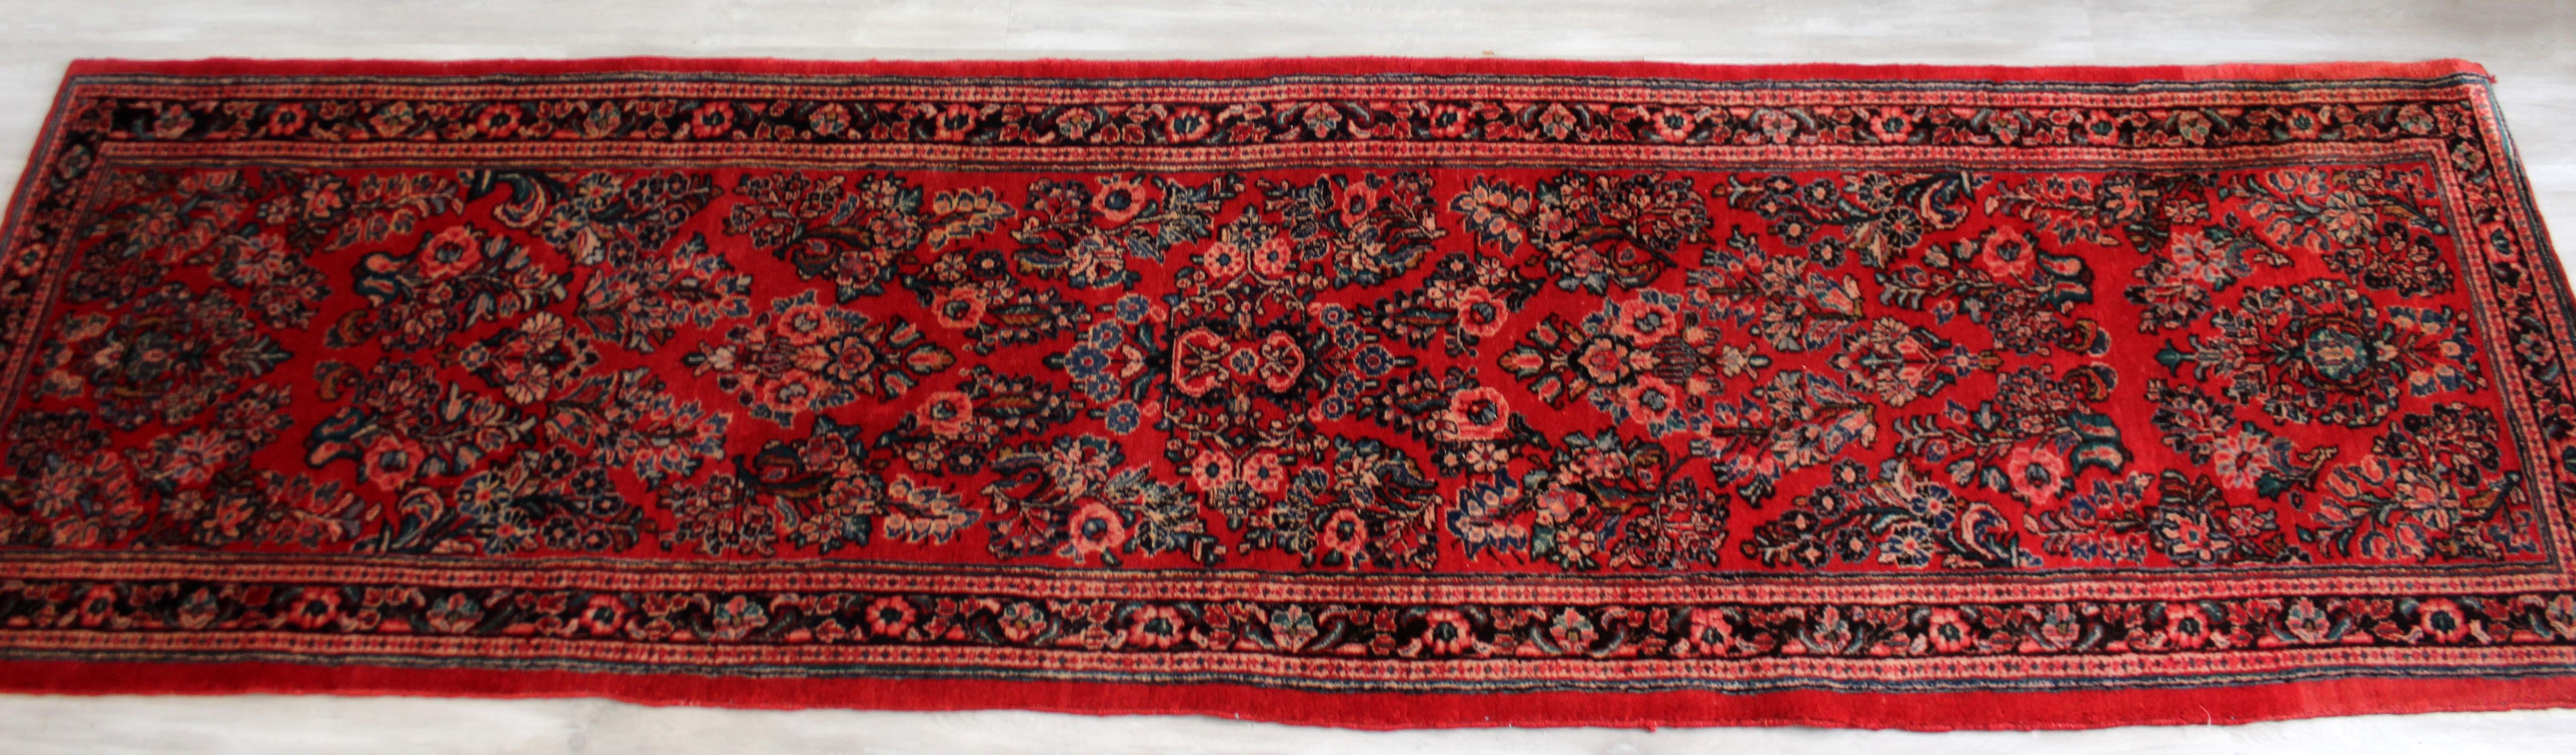 For your consideration is a beautiful and long, hand knotted wool runner rug, handmade. In very good vintage condition. The dimensions are 32.5